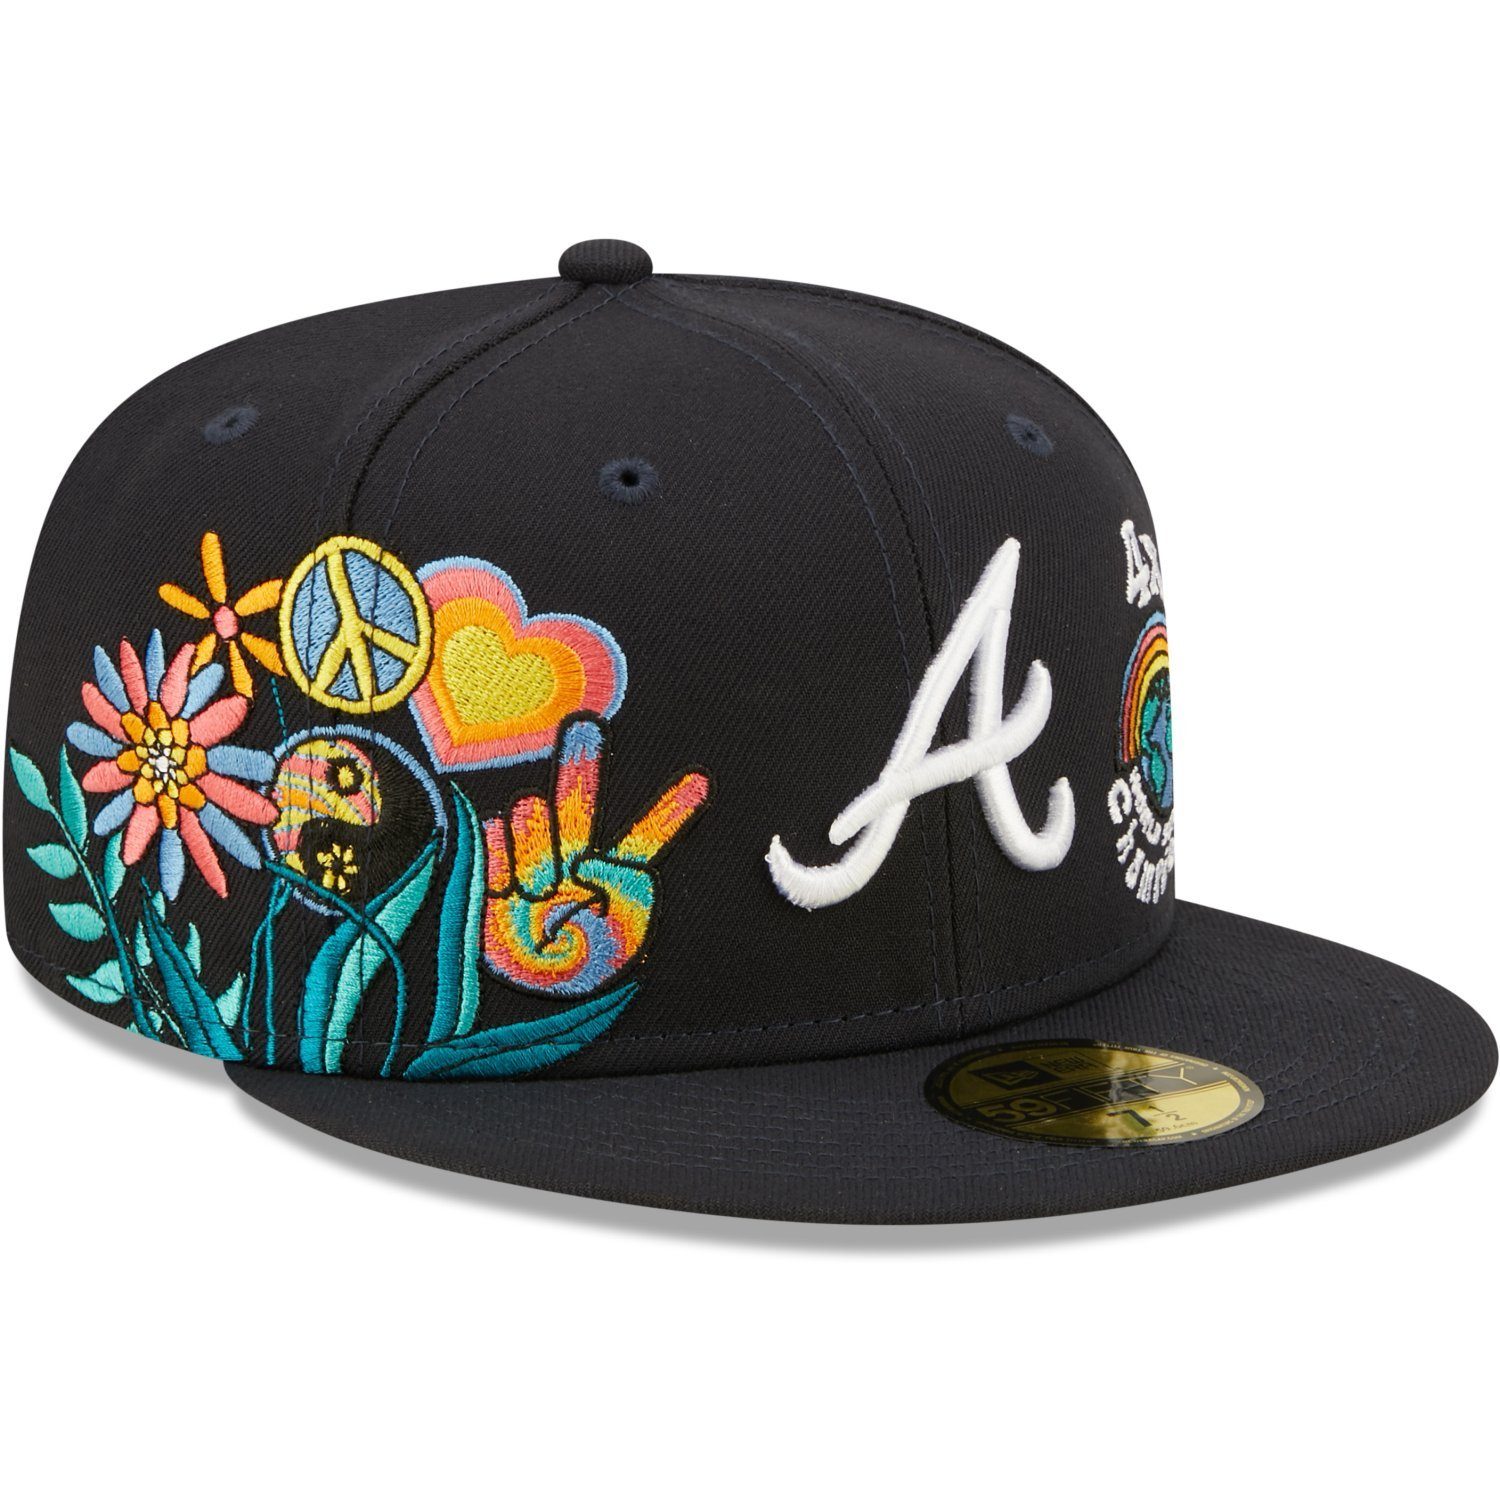 Fitted New Braves Cap Atlanta Era 59Fifty GROOVY